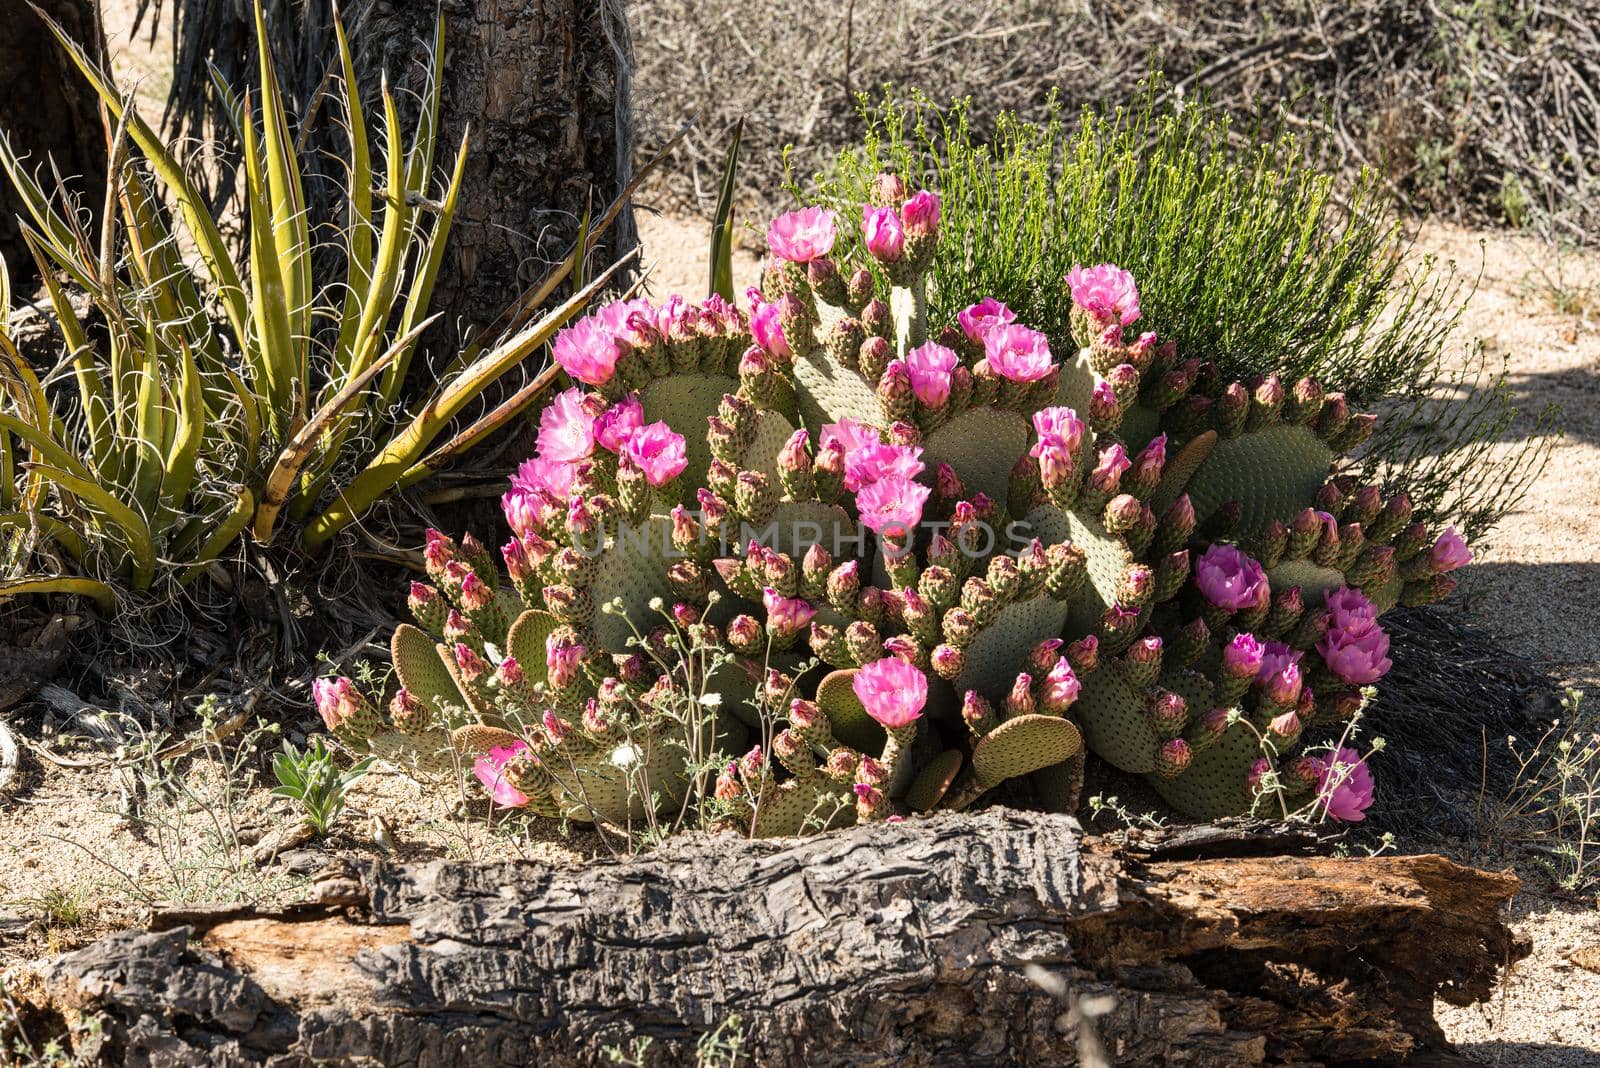 Blooming Desert Prickly Pear in flaming Pink by lisaldw